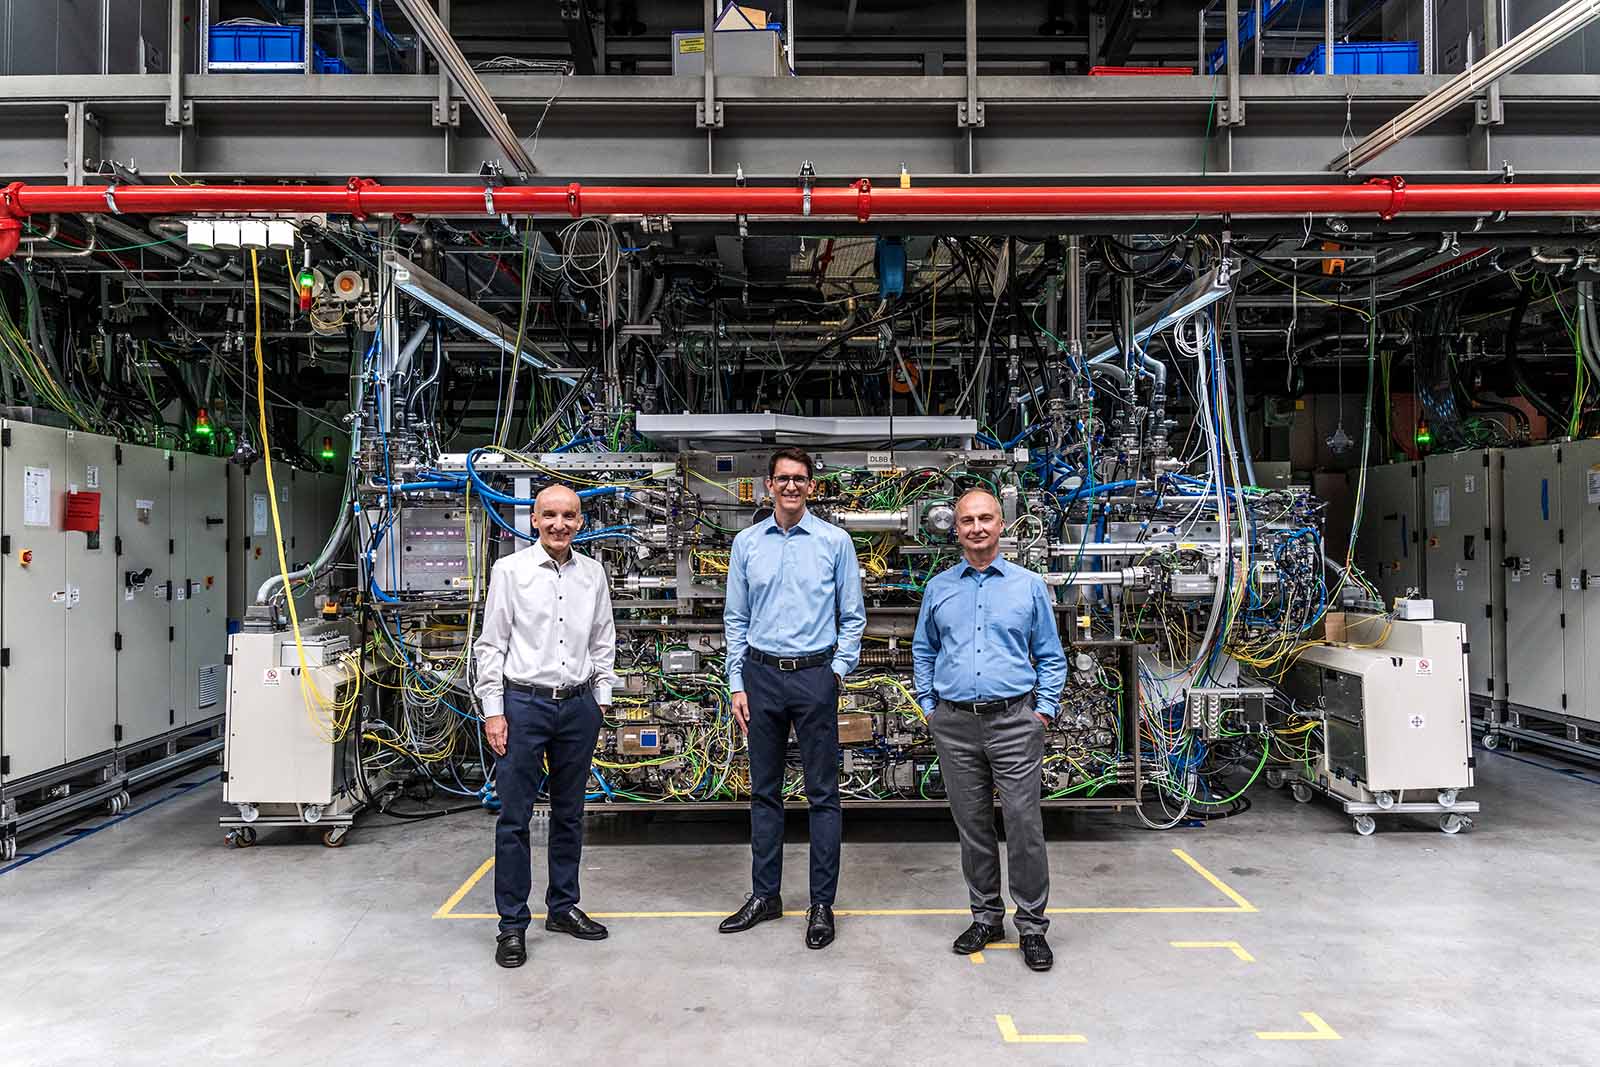 The team of experts in front of the world's strongest pulsed industrial laser, which is used for light generation to enable EUV lithography (from left): Dr. Peter Kürz from the ZEISS SMT segment, Dr. Michael Kösters from TRUMPF Lasersystems for Semiconductor Manufacturing, and Dr. Sergiy Yulin from the Fraunhofer Institute for Applied Optics and Precision Engineering (IOF).